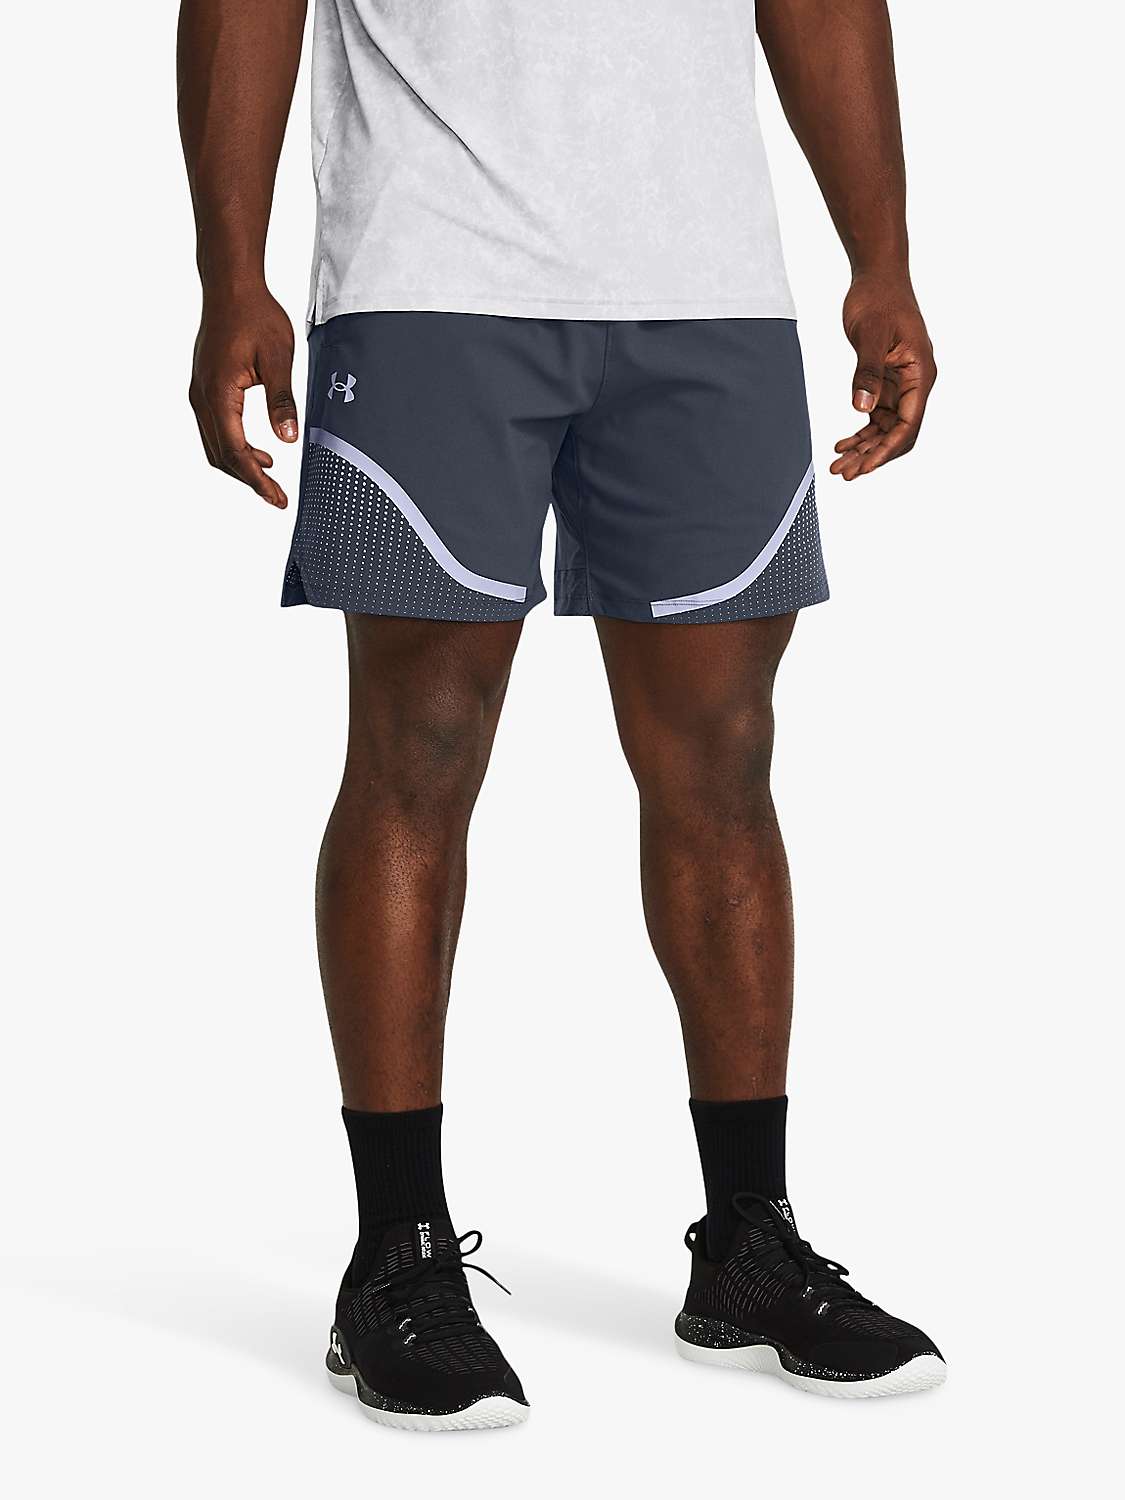 Buy Under Amour Vanish Woven 6" Graphic Shorts, Grey Online at johnlewis.com